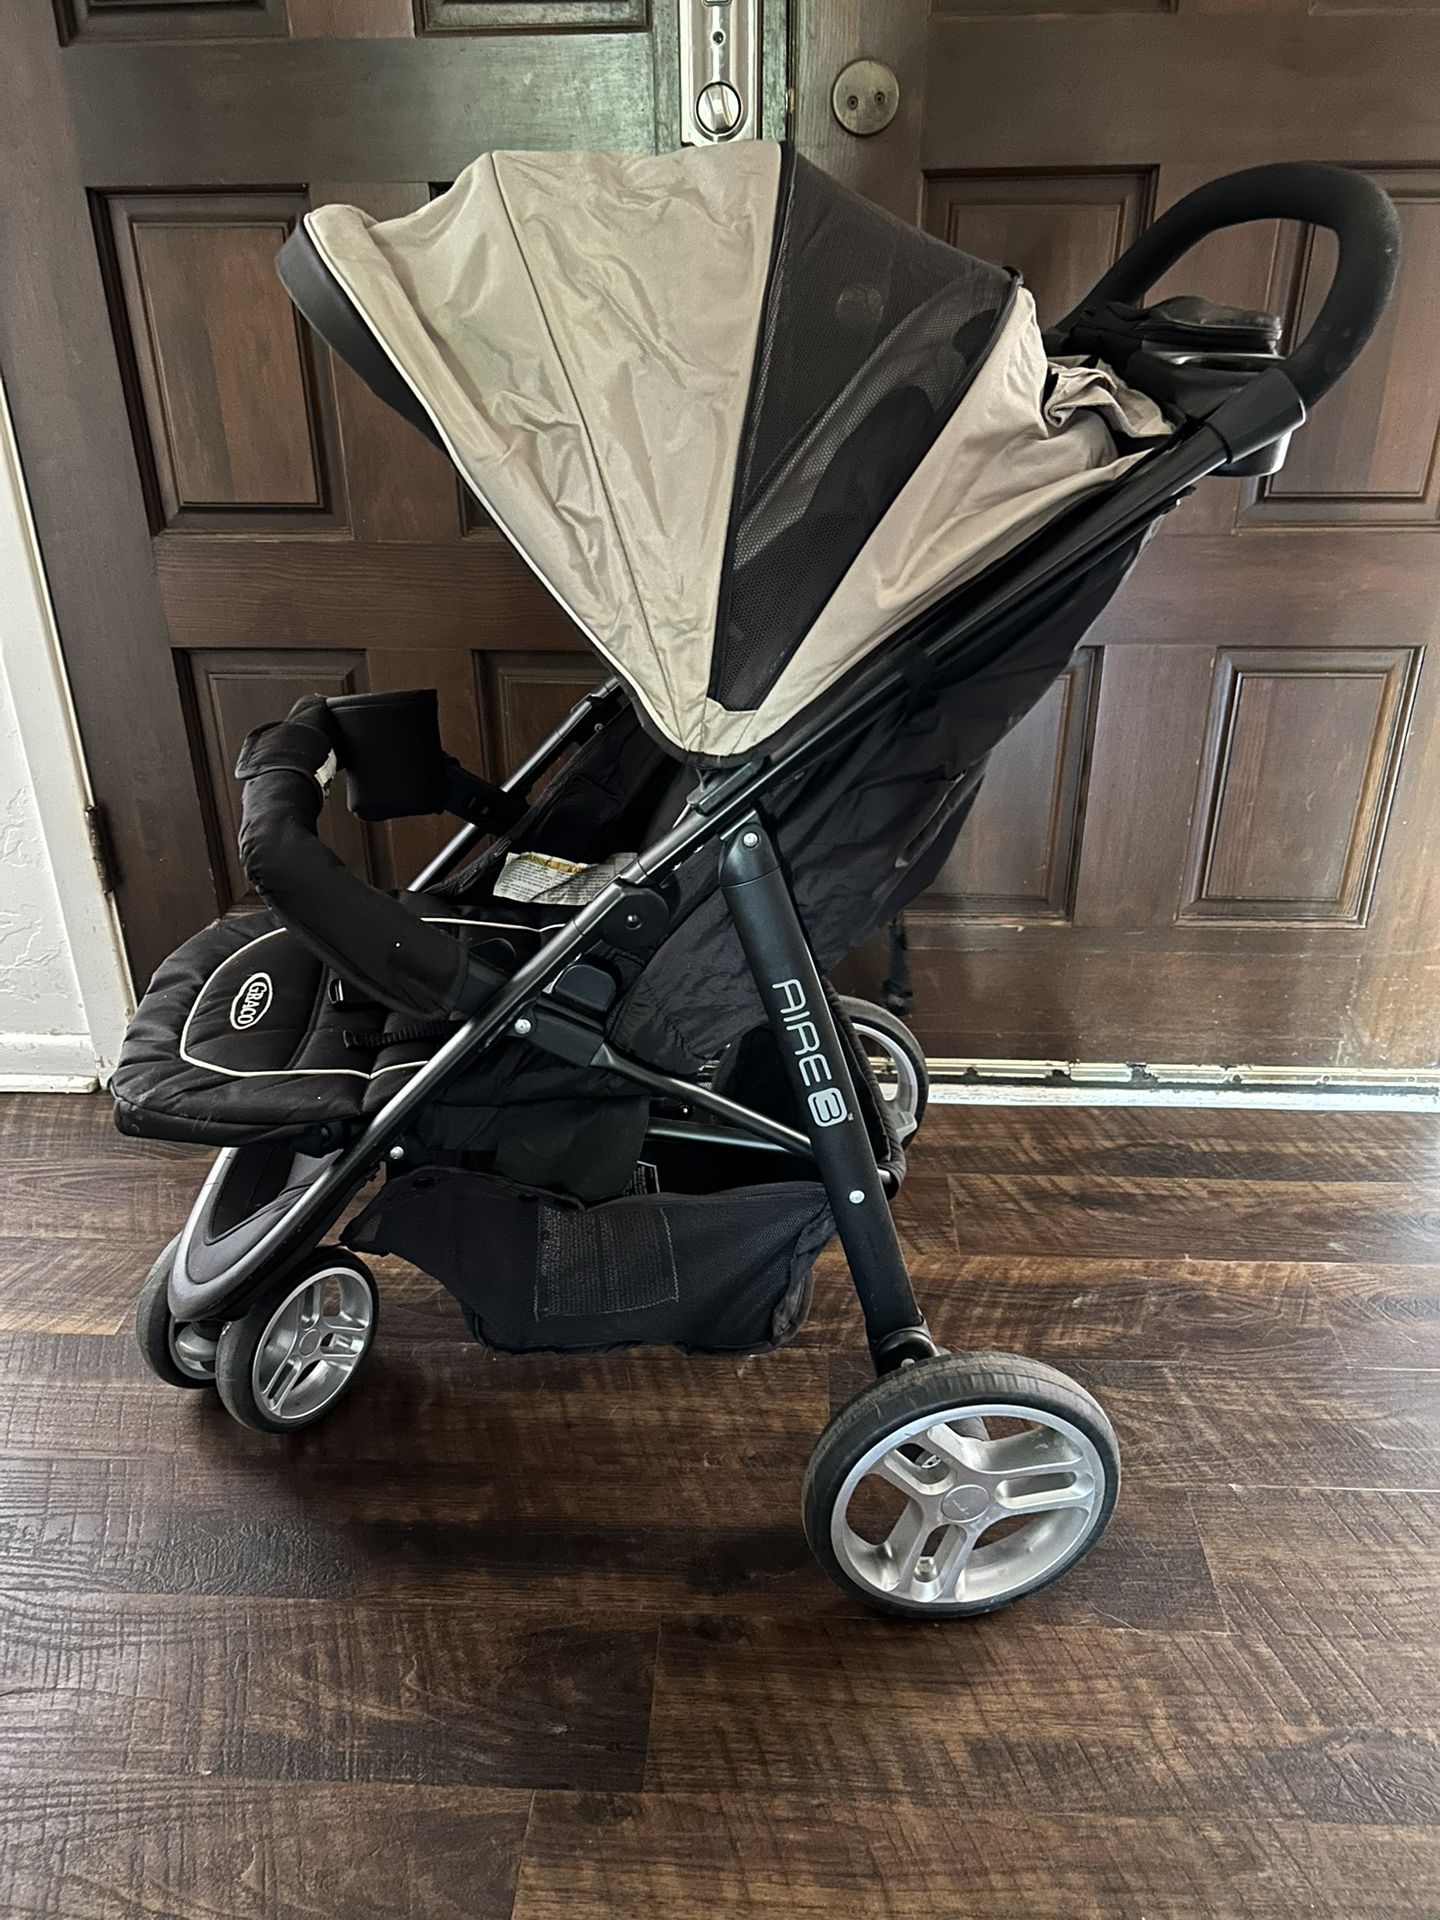 Graco Aire 3 Stroller 